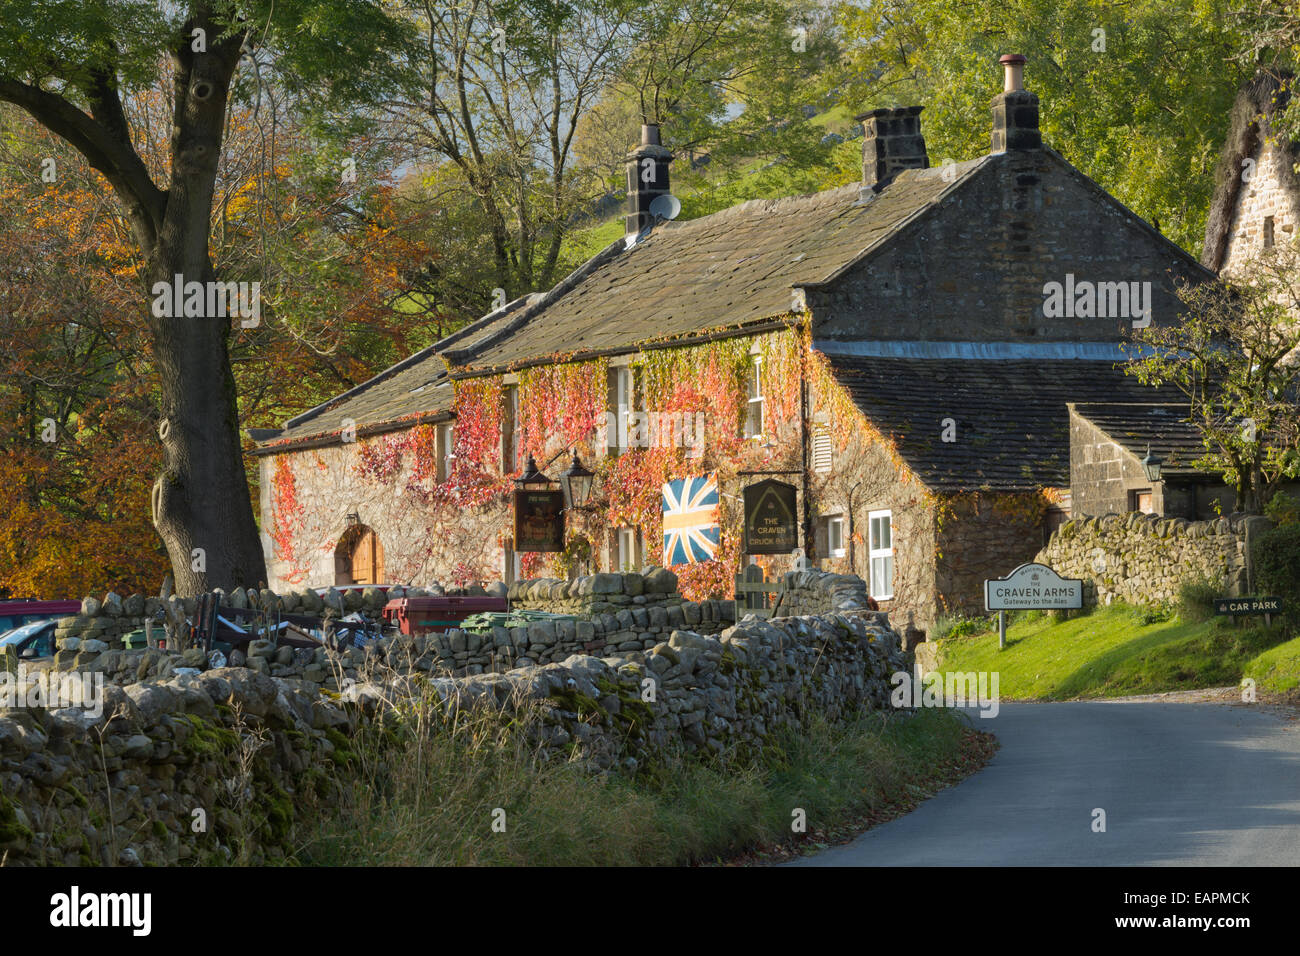 Il Craven Arms, Appletreewick, Wharfdale nel Yorkshire Dales, Inghilterra. Foto Stock